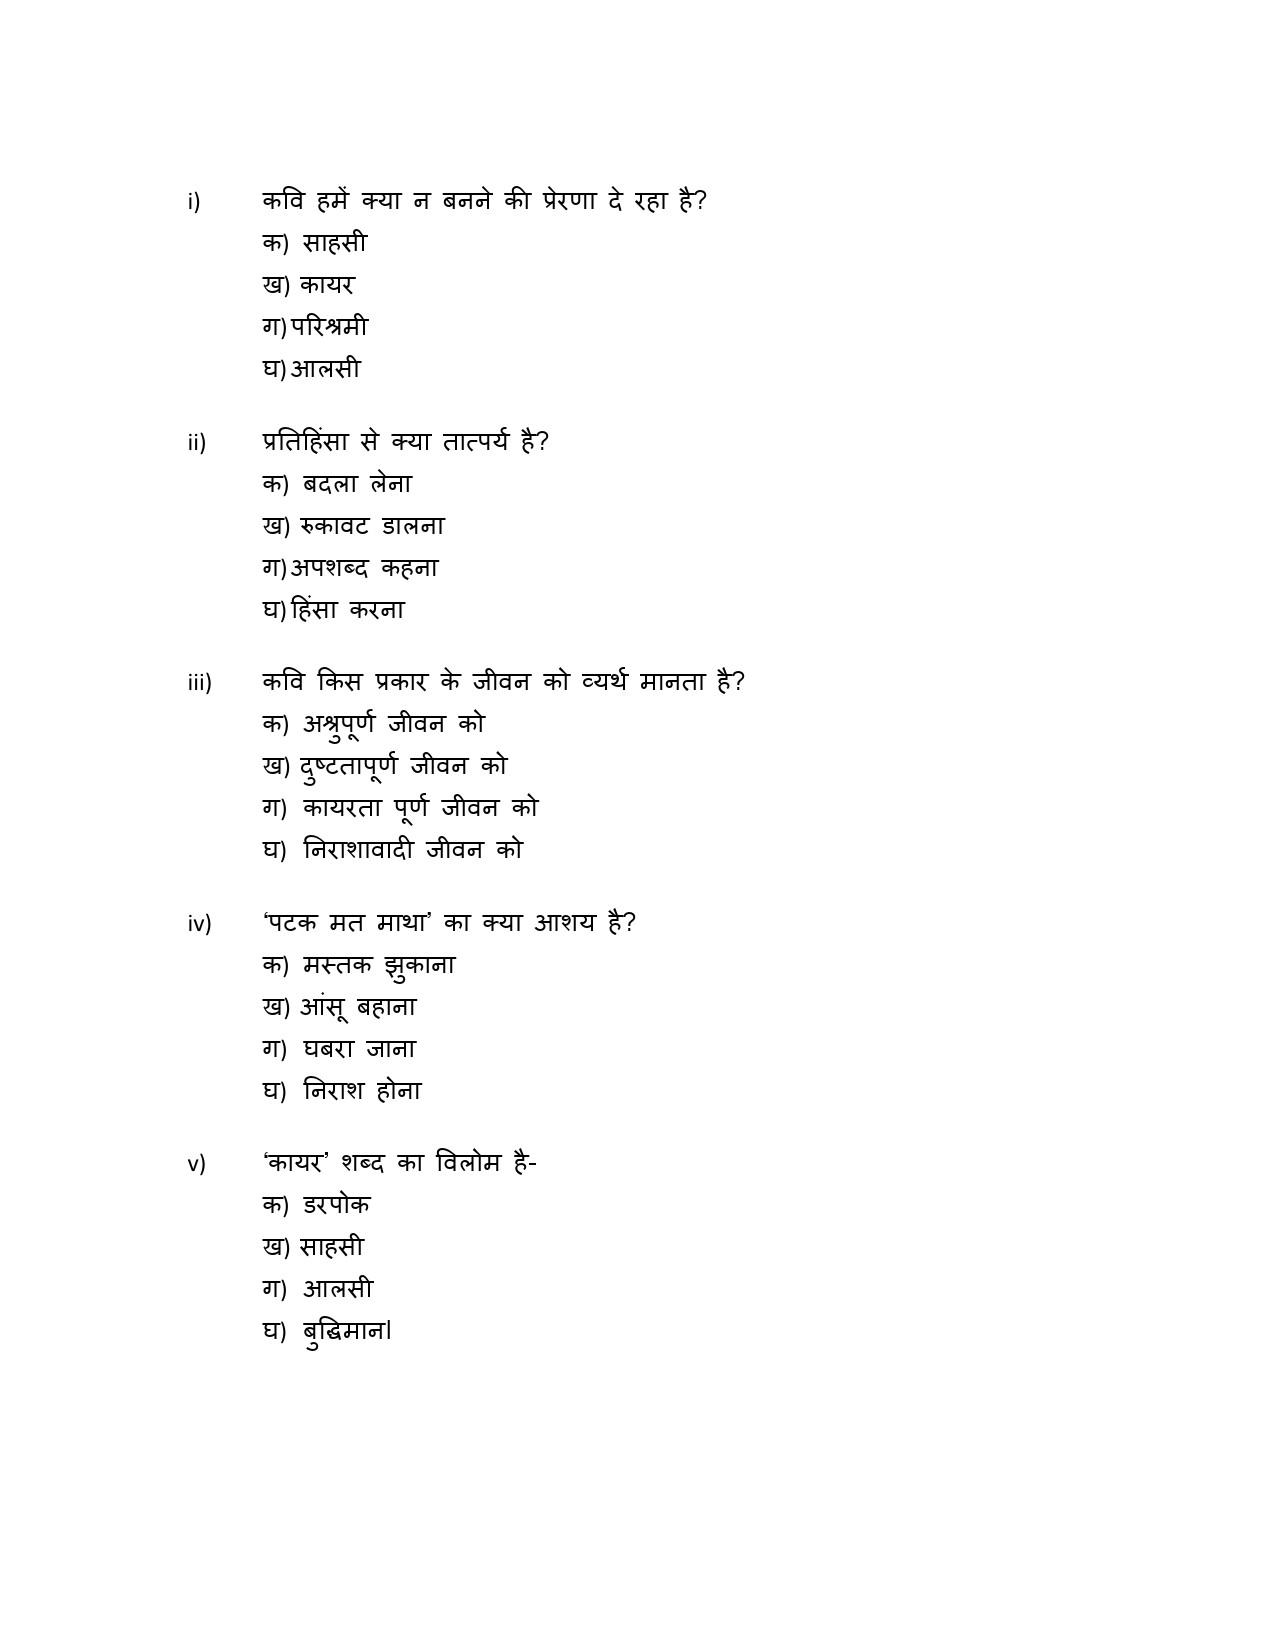 Hindi A CBSE Class X Sample Question Paper 2015 16 - Image 6